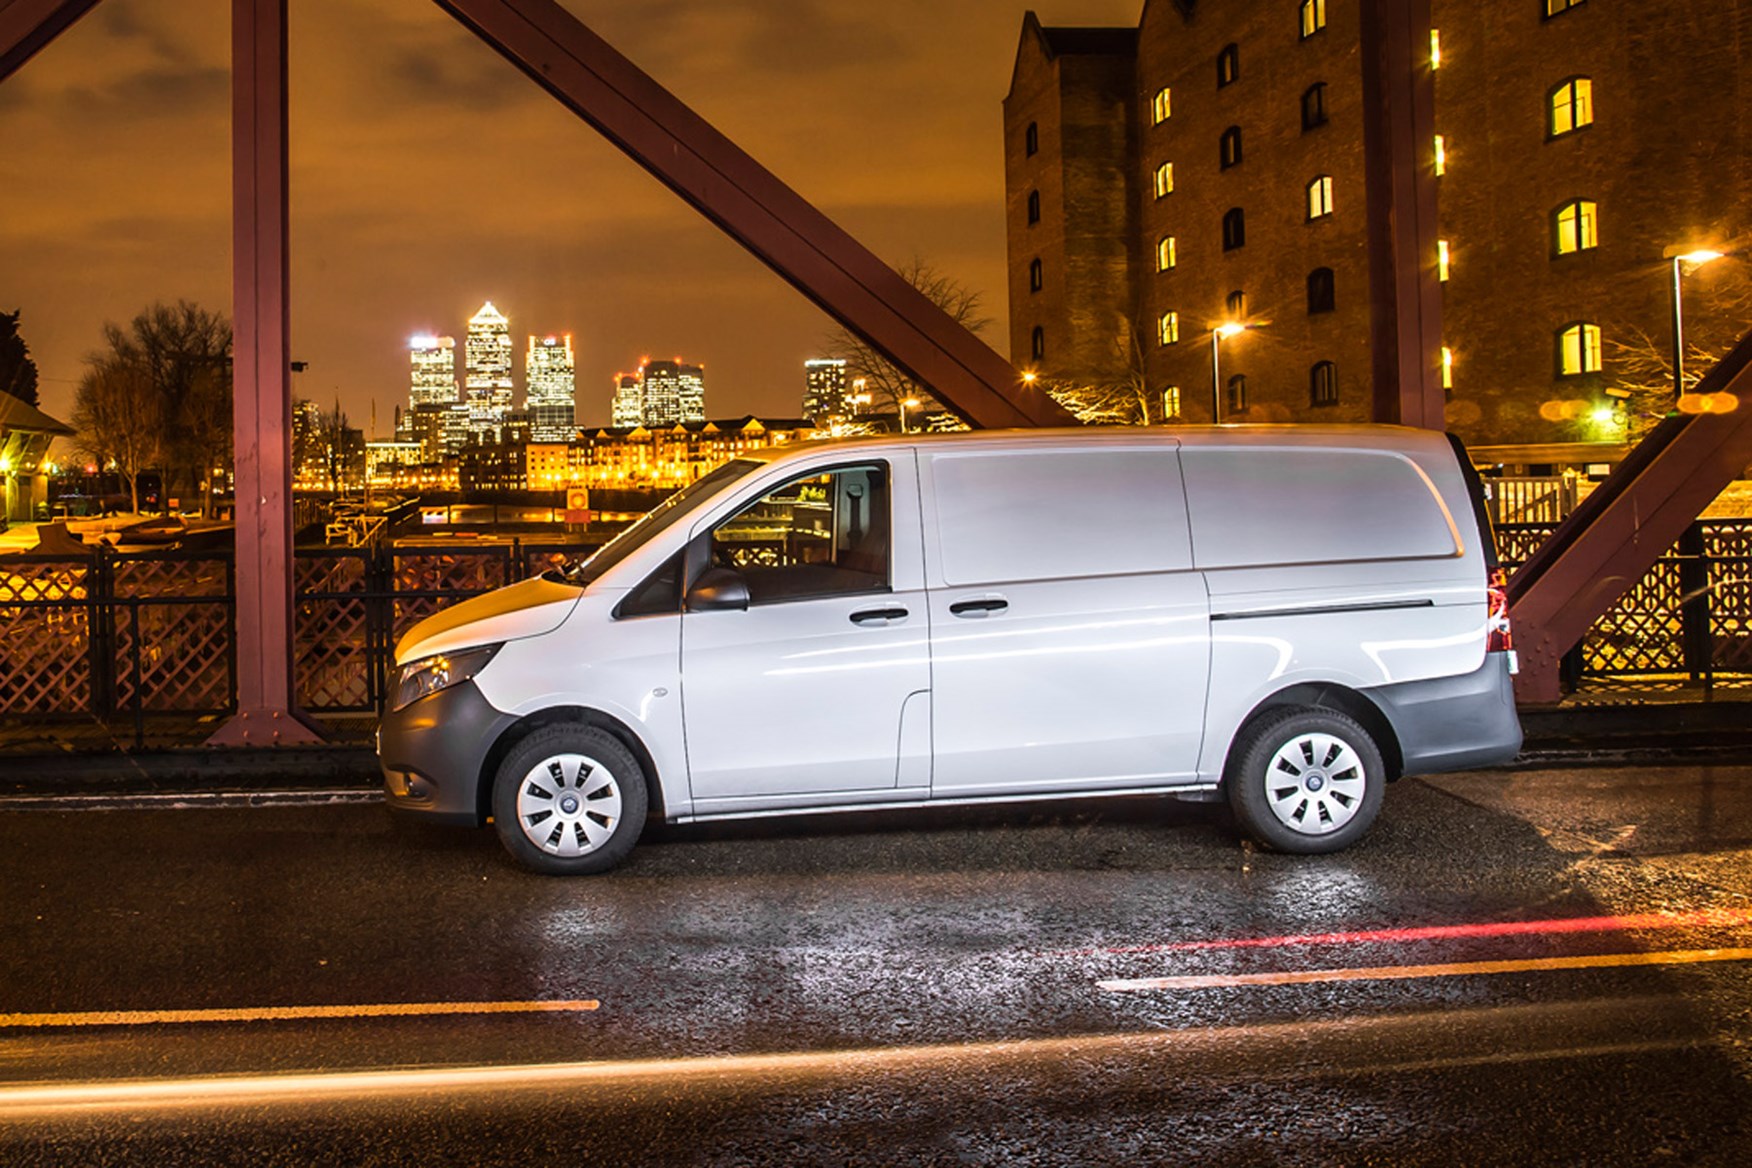 Mercedes-Benz Vito full review on Parkers Vans - side exterior